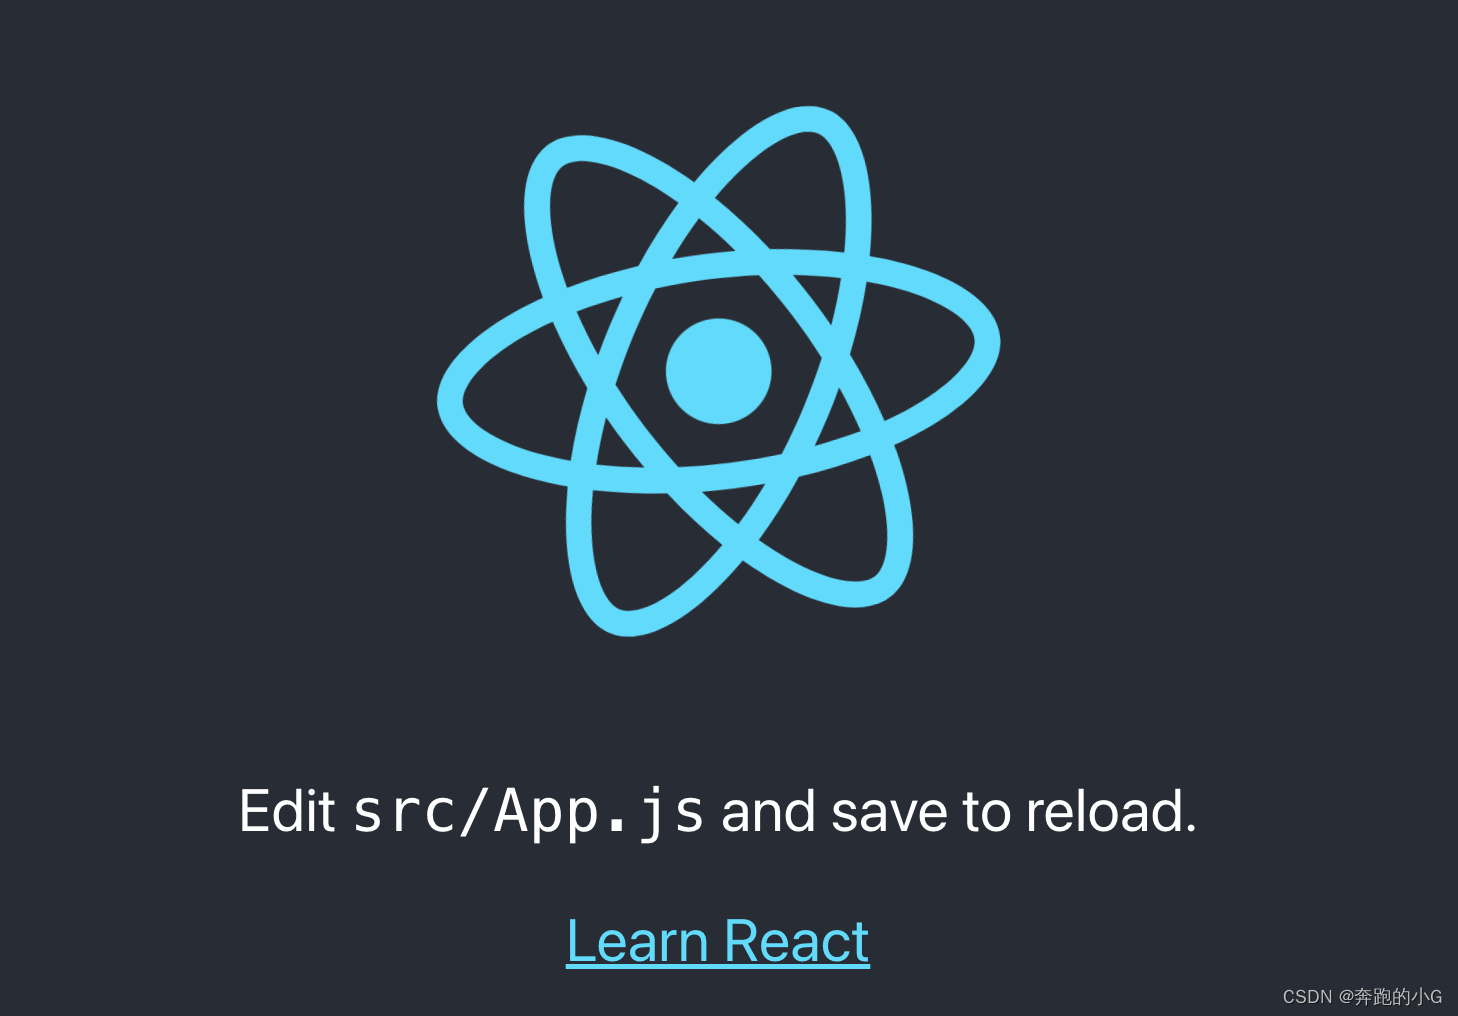 【React】极客园--01.项目<span style='color:red;'>前</span><span style='color:red;'>置</span><span style='color:red;'>准备</span>